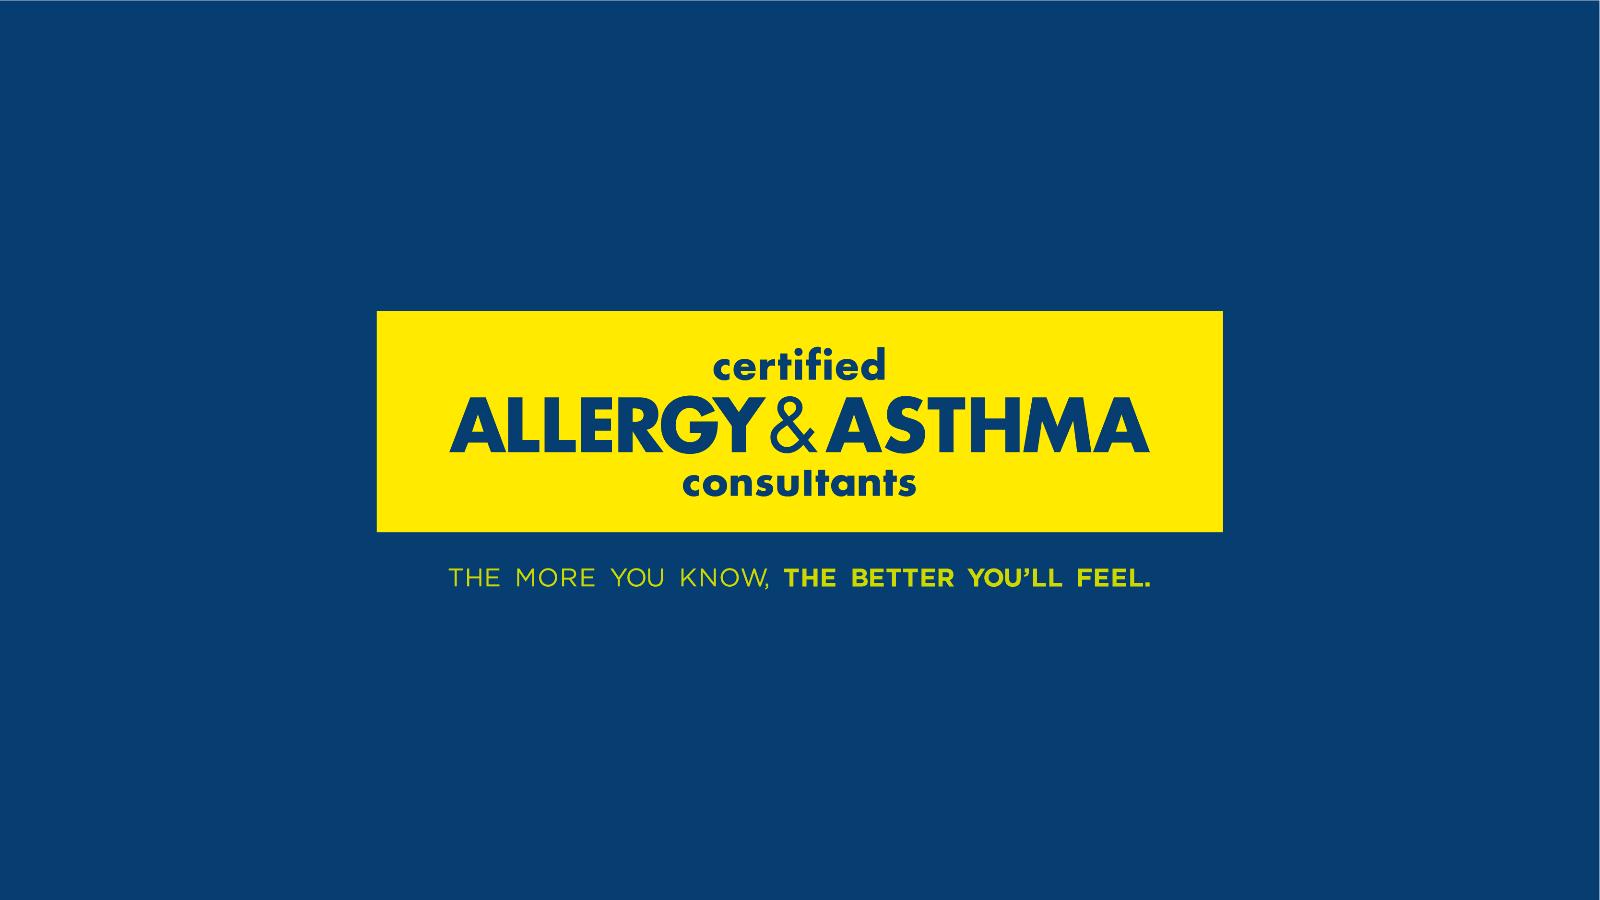 Certified Allergy & Asthma Consultants | Horizontal logo on blue